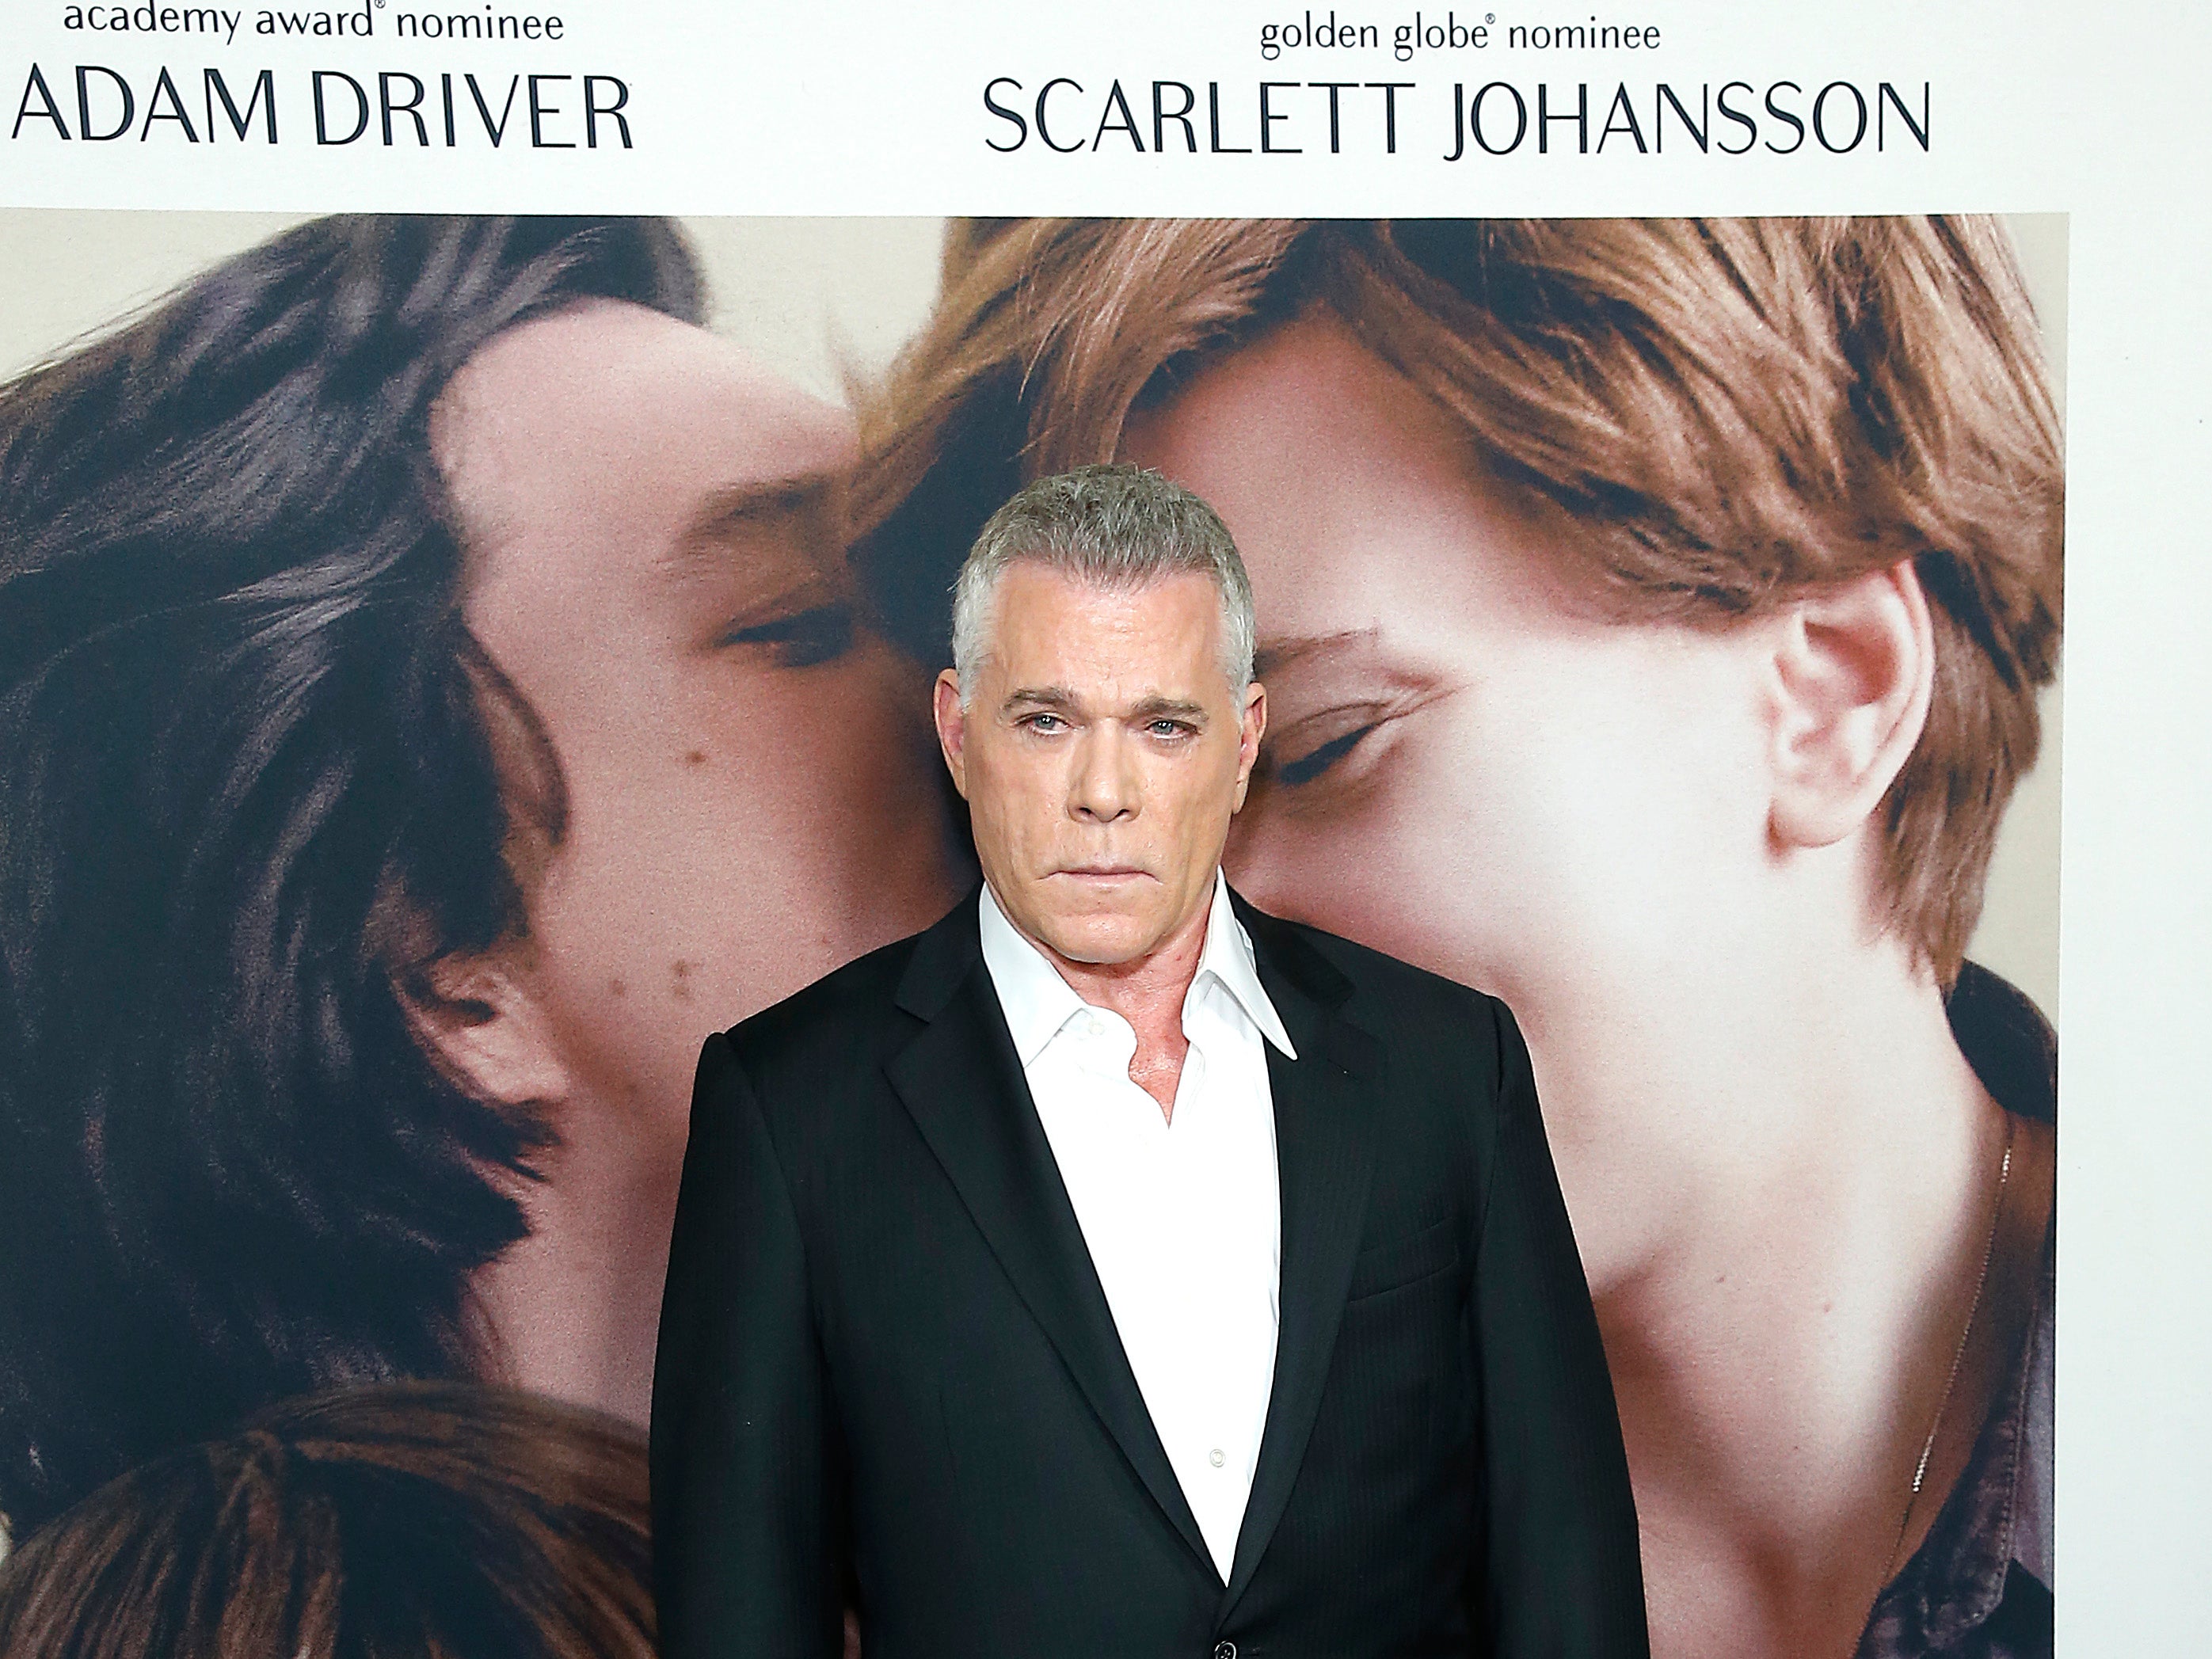 Liotta at the premiere of ‘Marriage Story’